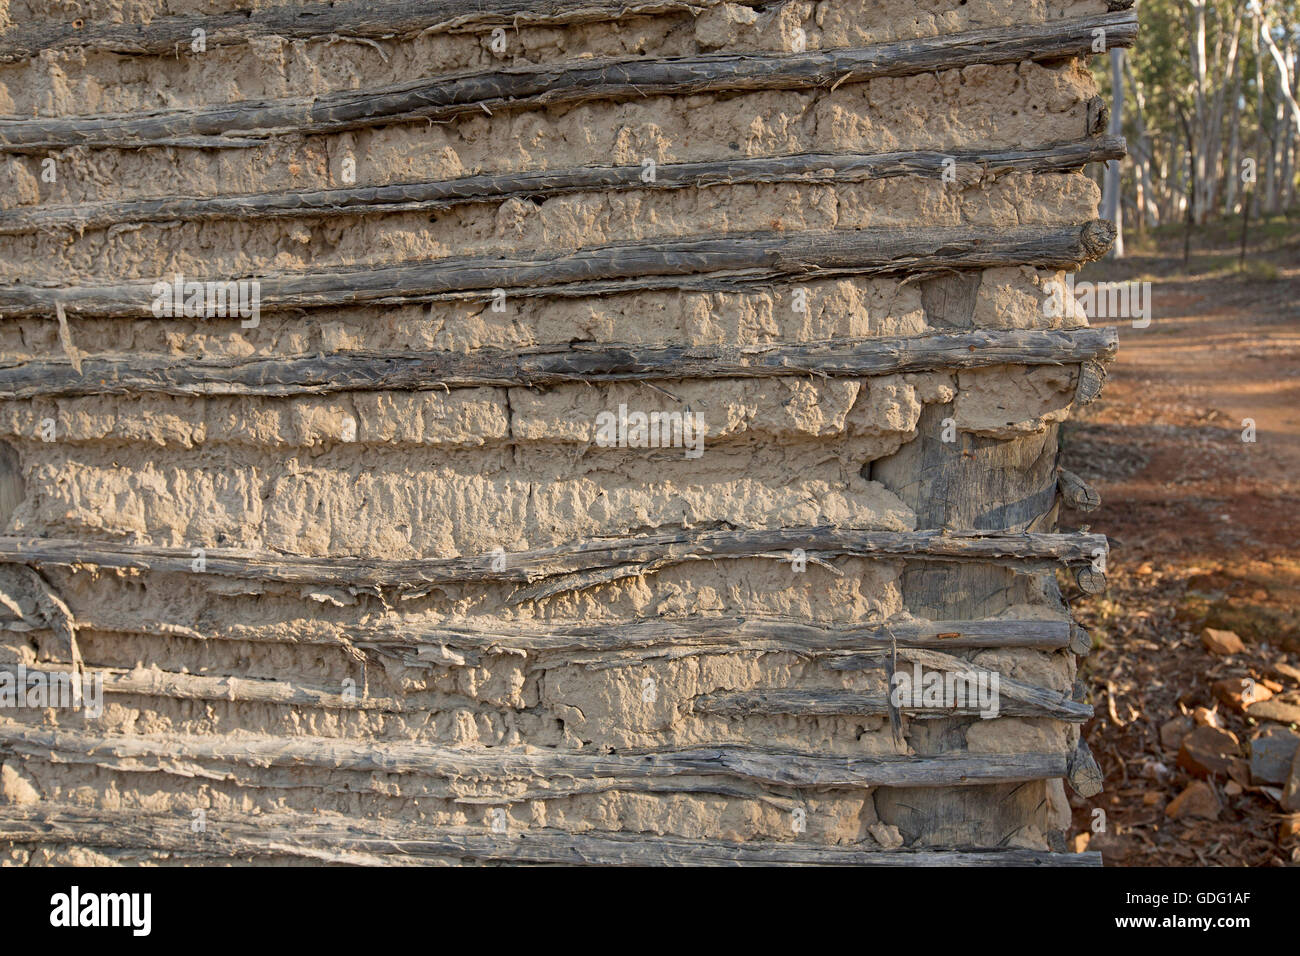 Section of wall of building made with wattle & daub showing a simple inexpensive method of construction with natural materials Stock Photo